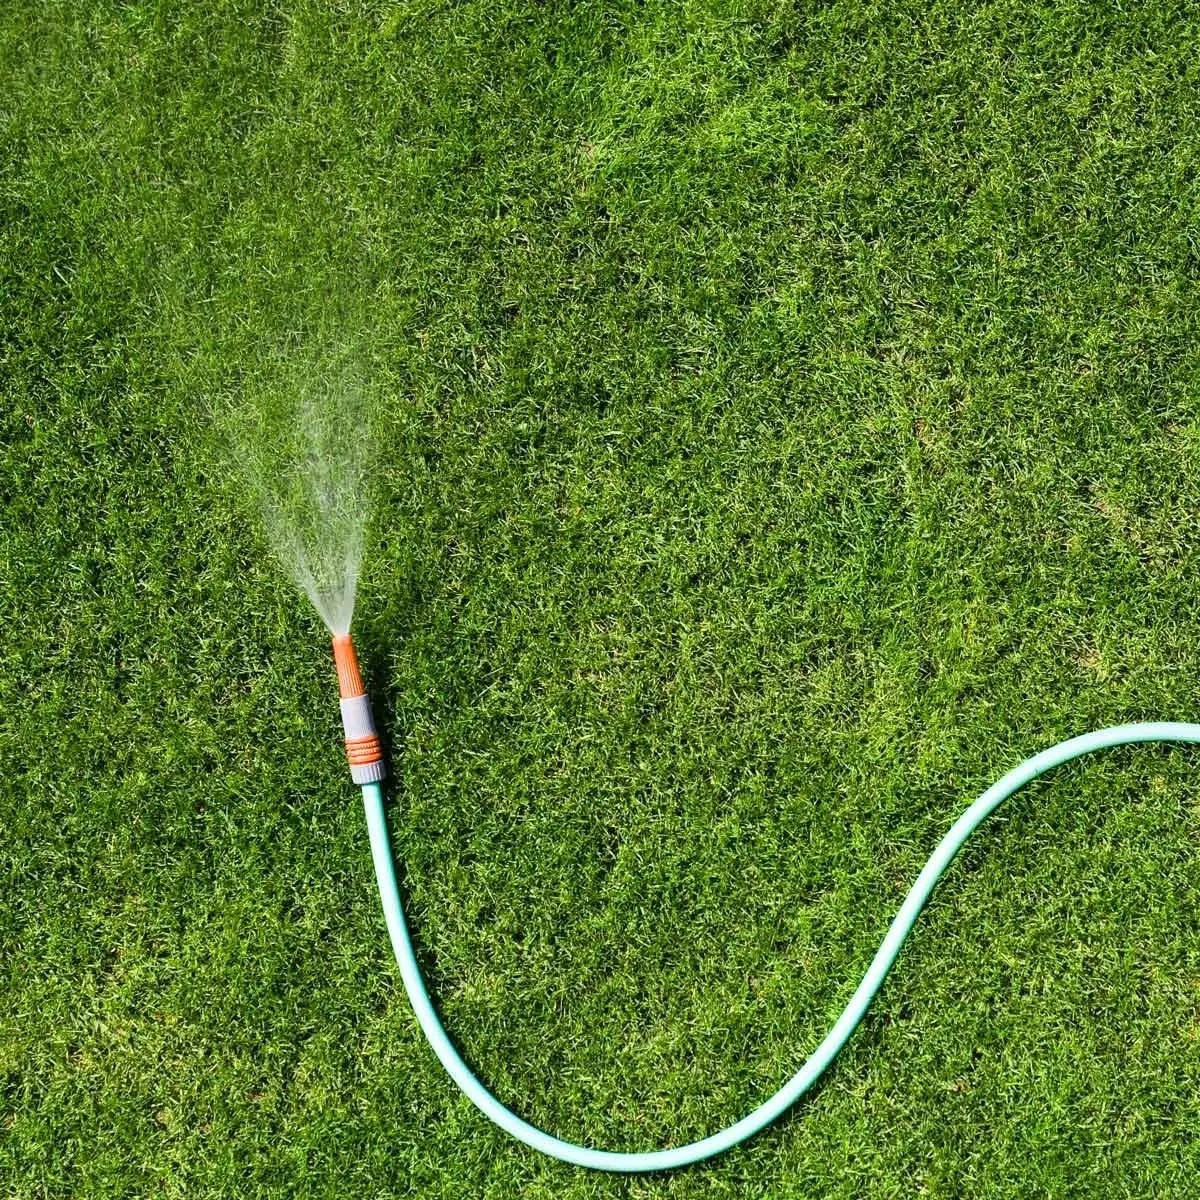 When Is the Best Time to Water My Grass?